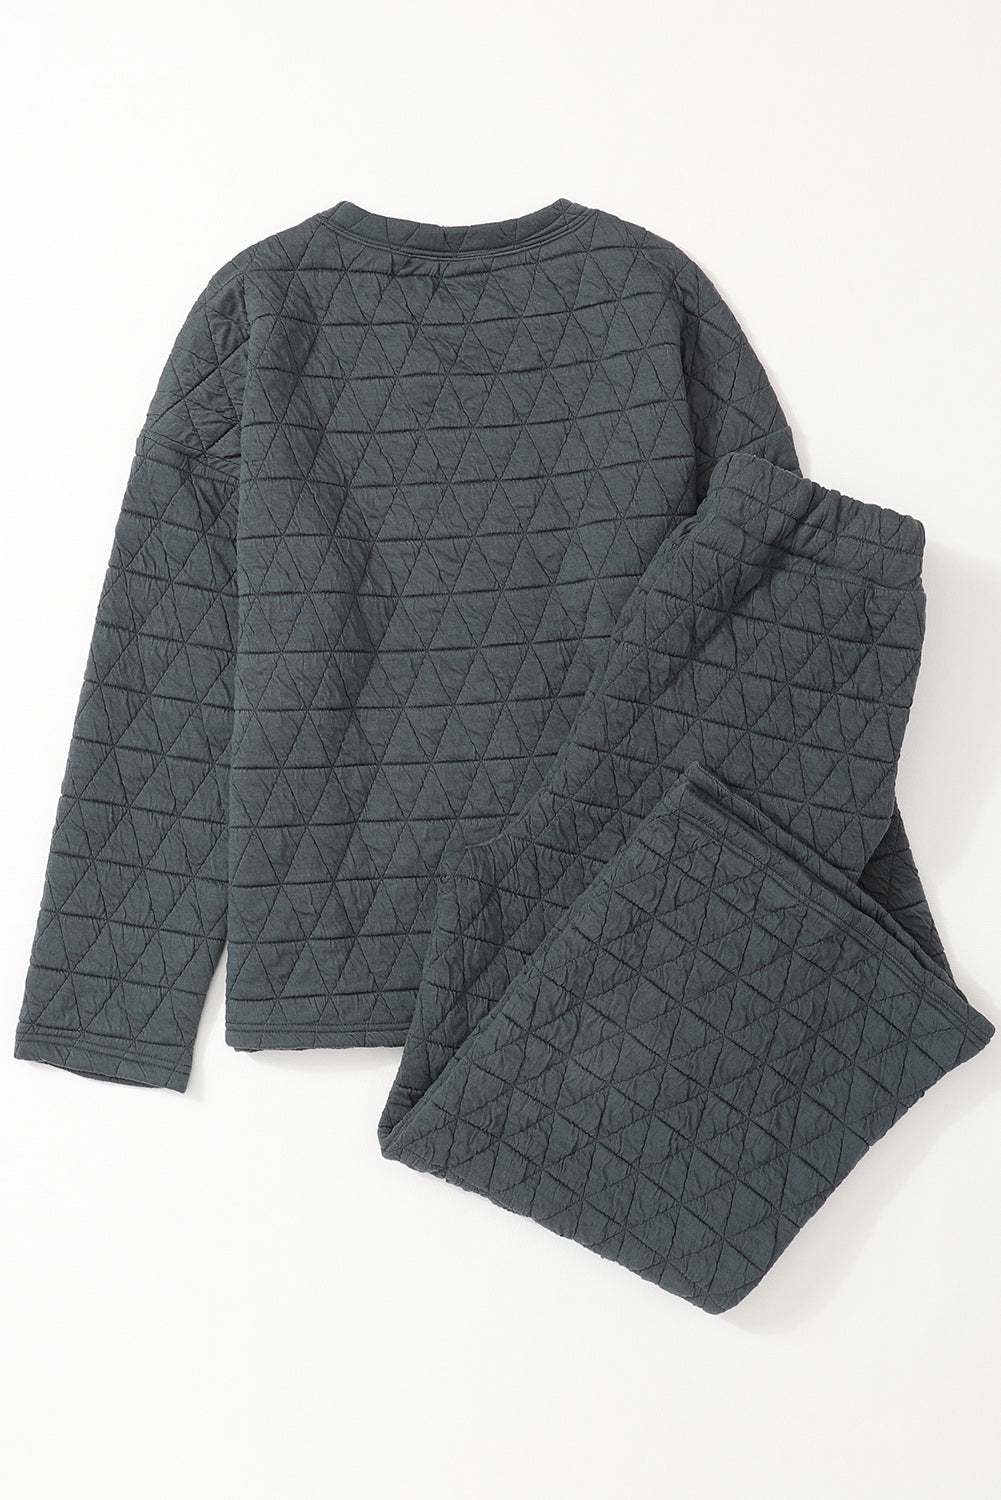 Blue Zone Planet |  Dark Grey Solid Quilted Pullover and Pants Outfit Blue Zone Planet